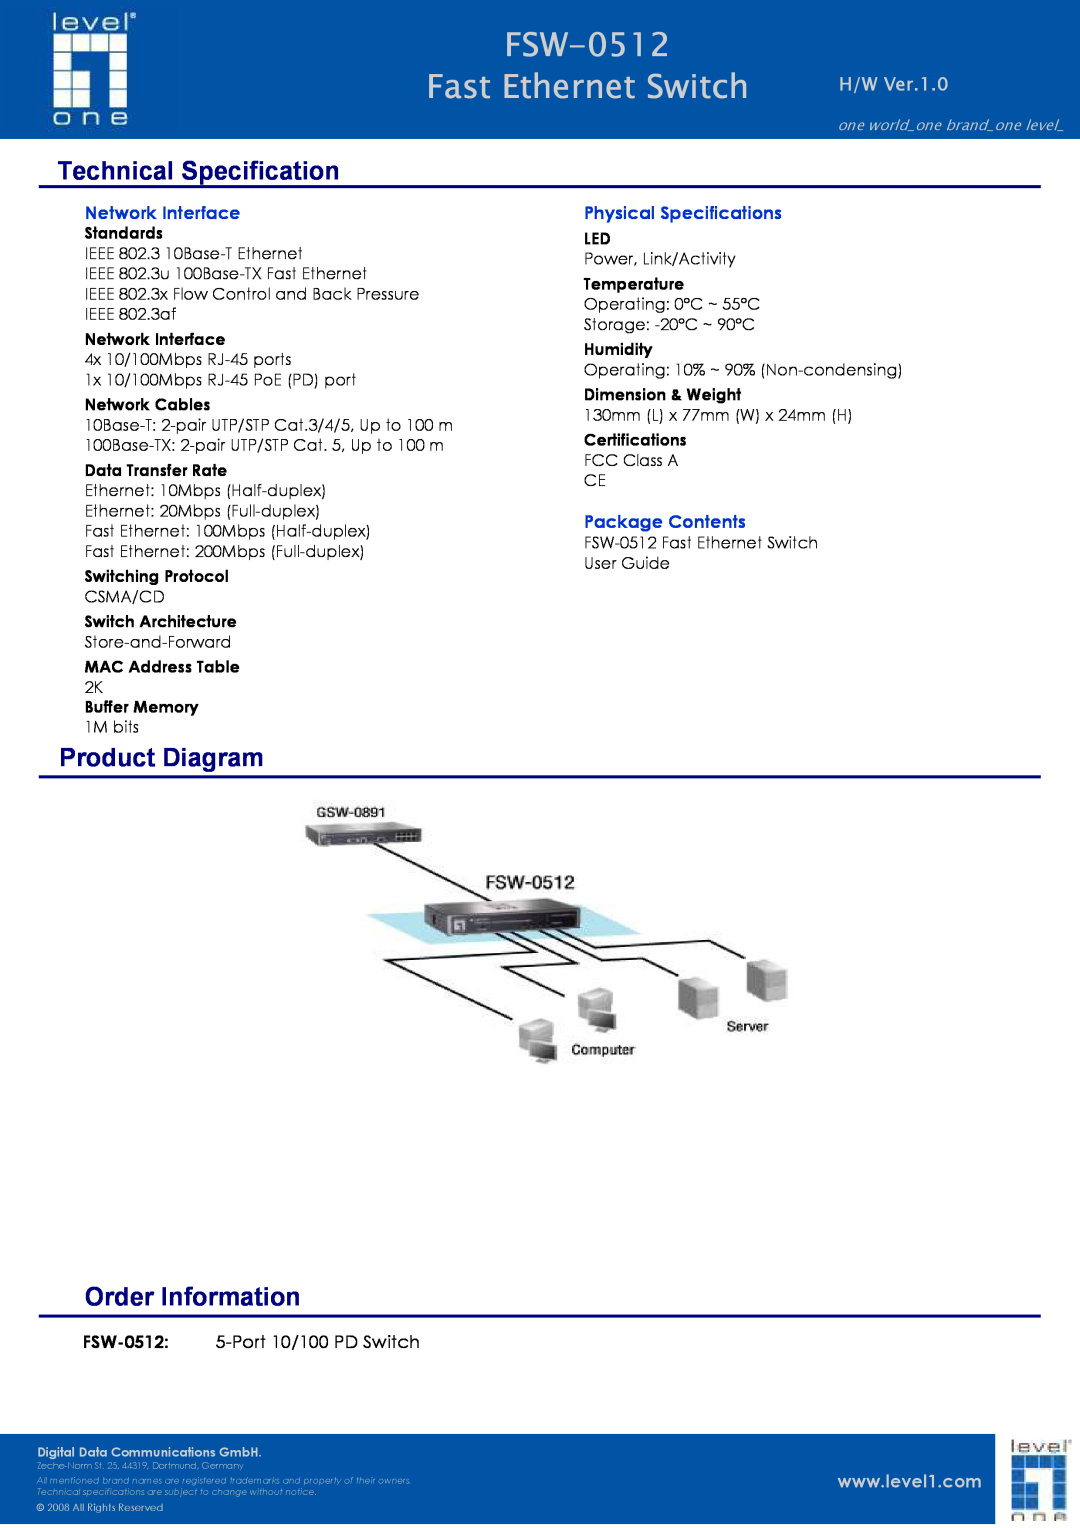 LevelOne Technical Specification, Product Diagram, Order Information, FSW-0512 5-Port 10/100 PD Switch, H/W Ver.1.0 